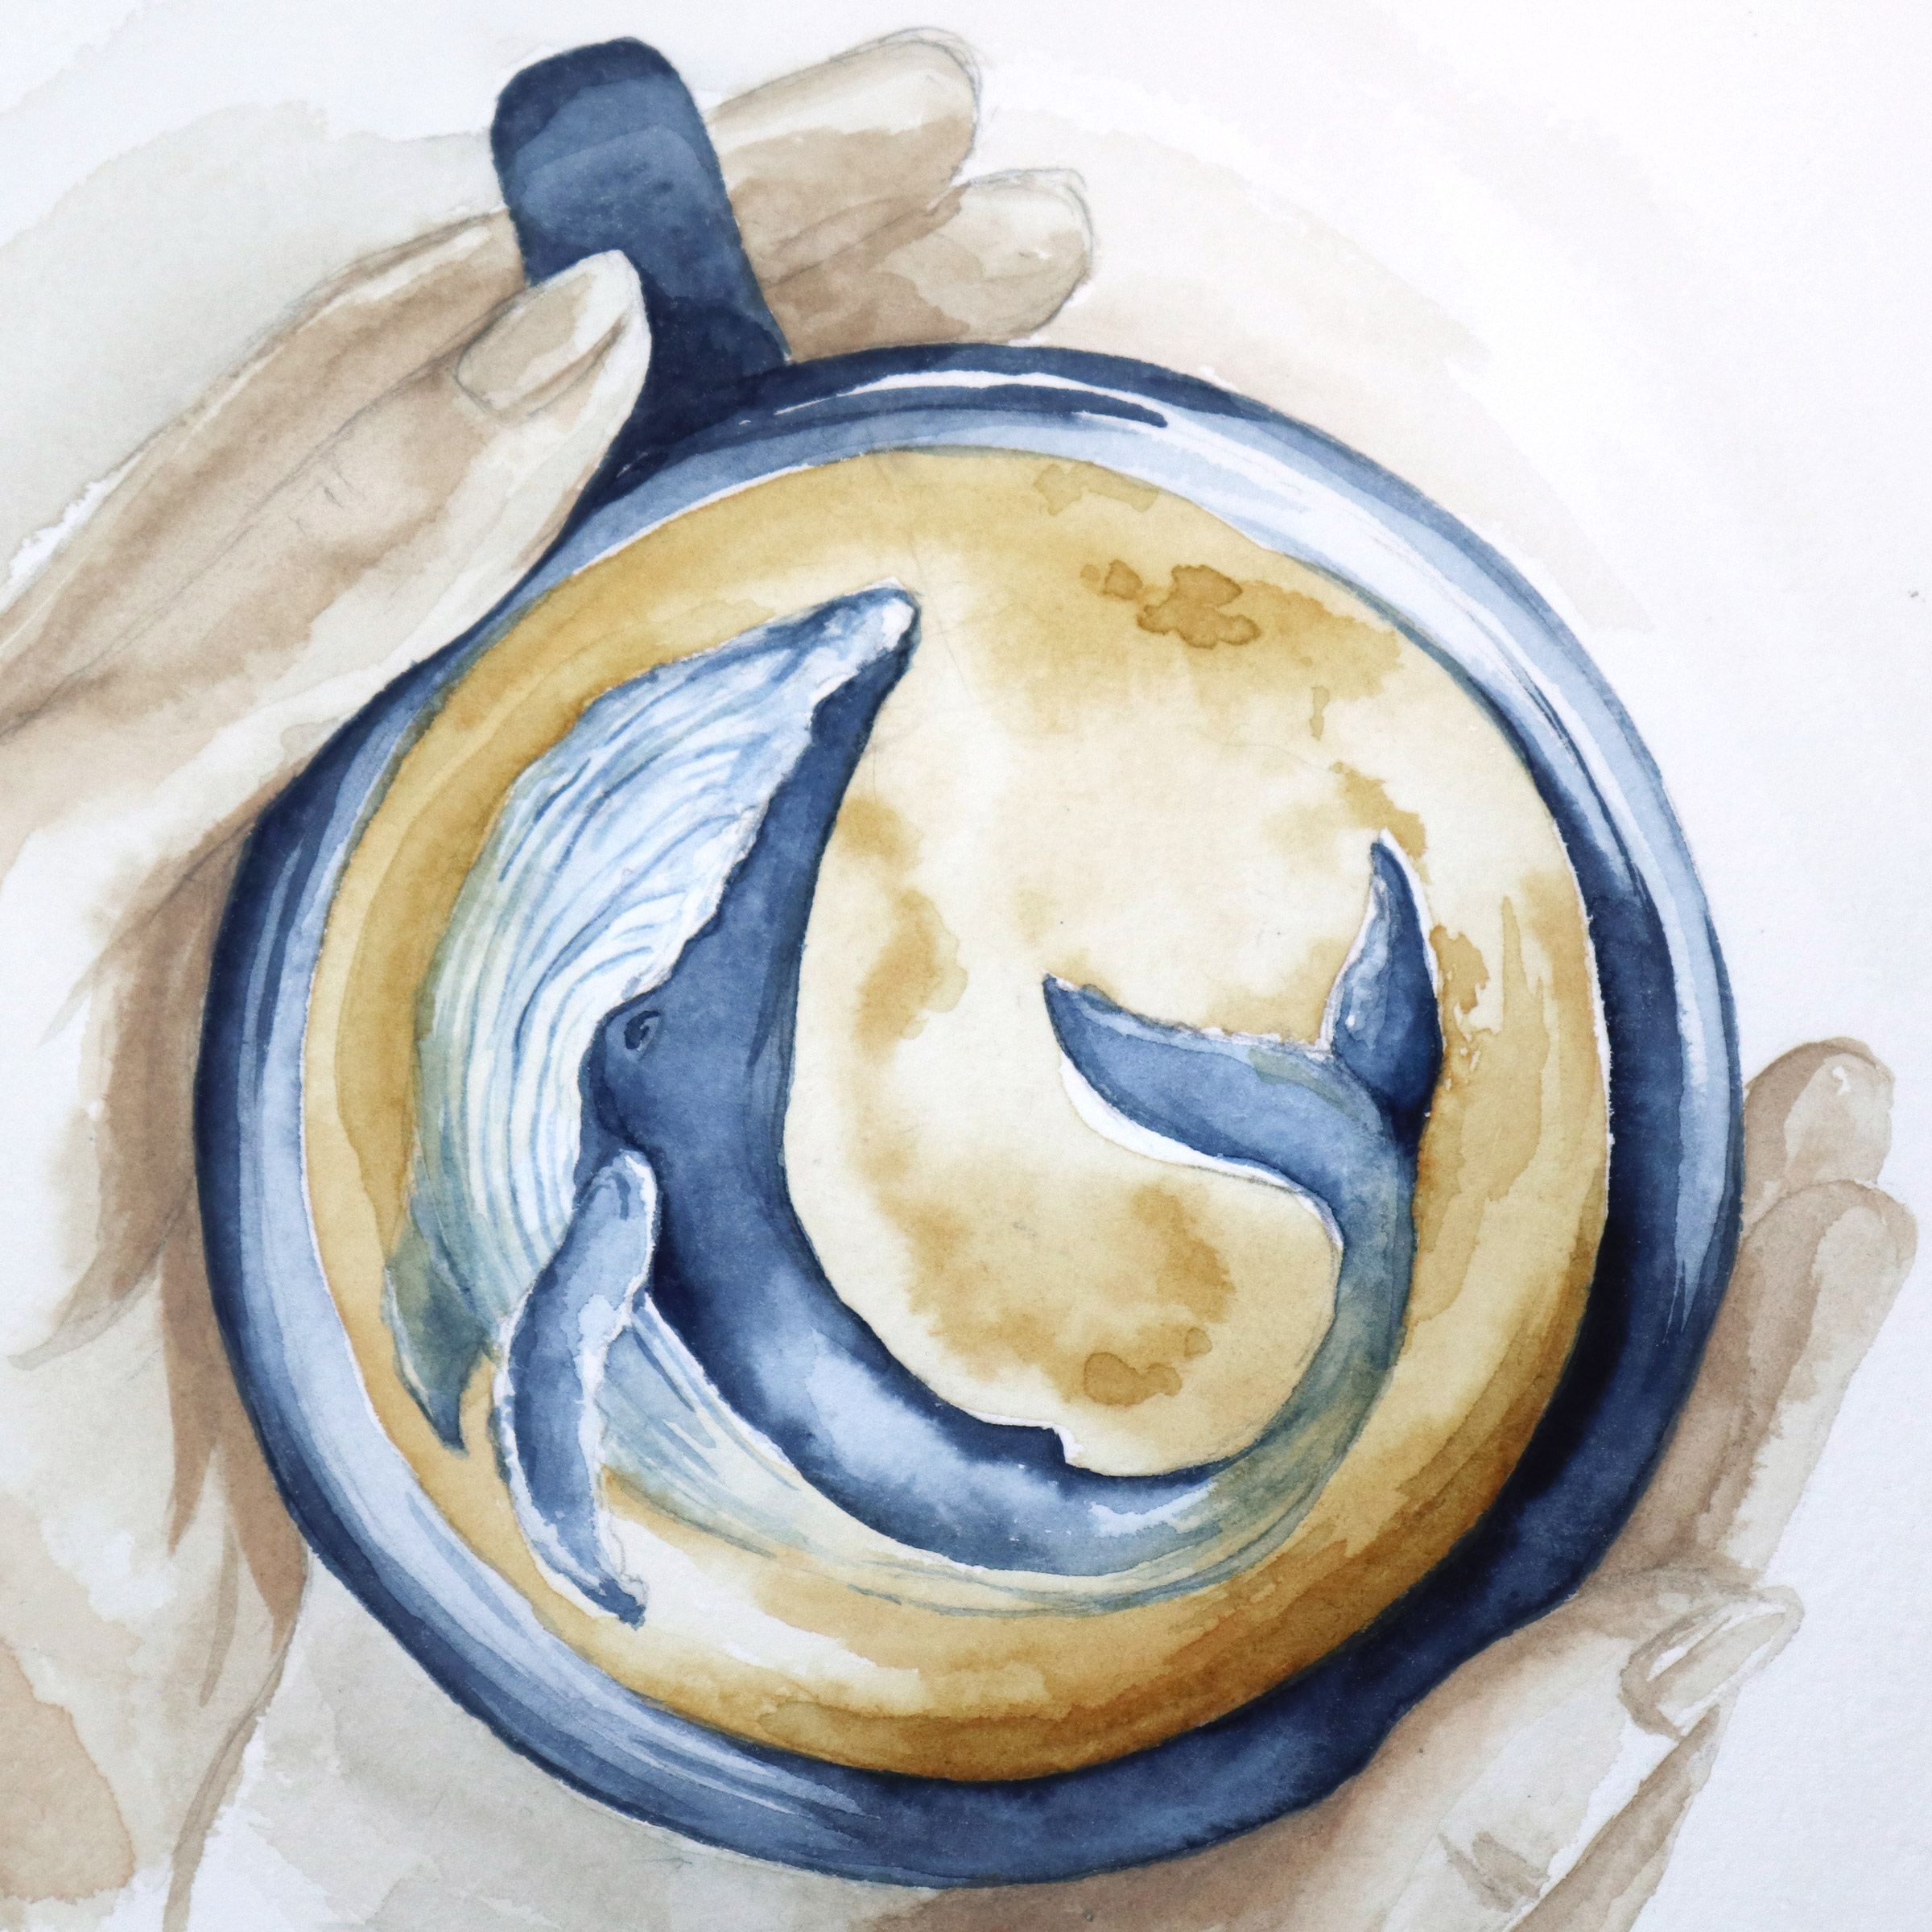 "Whale in my coffee"